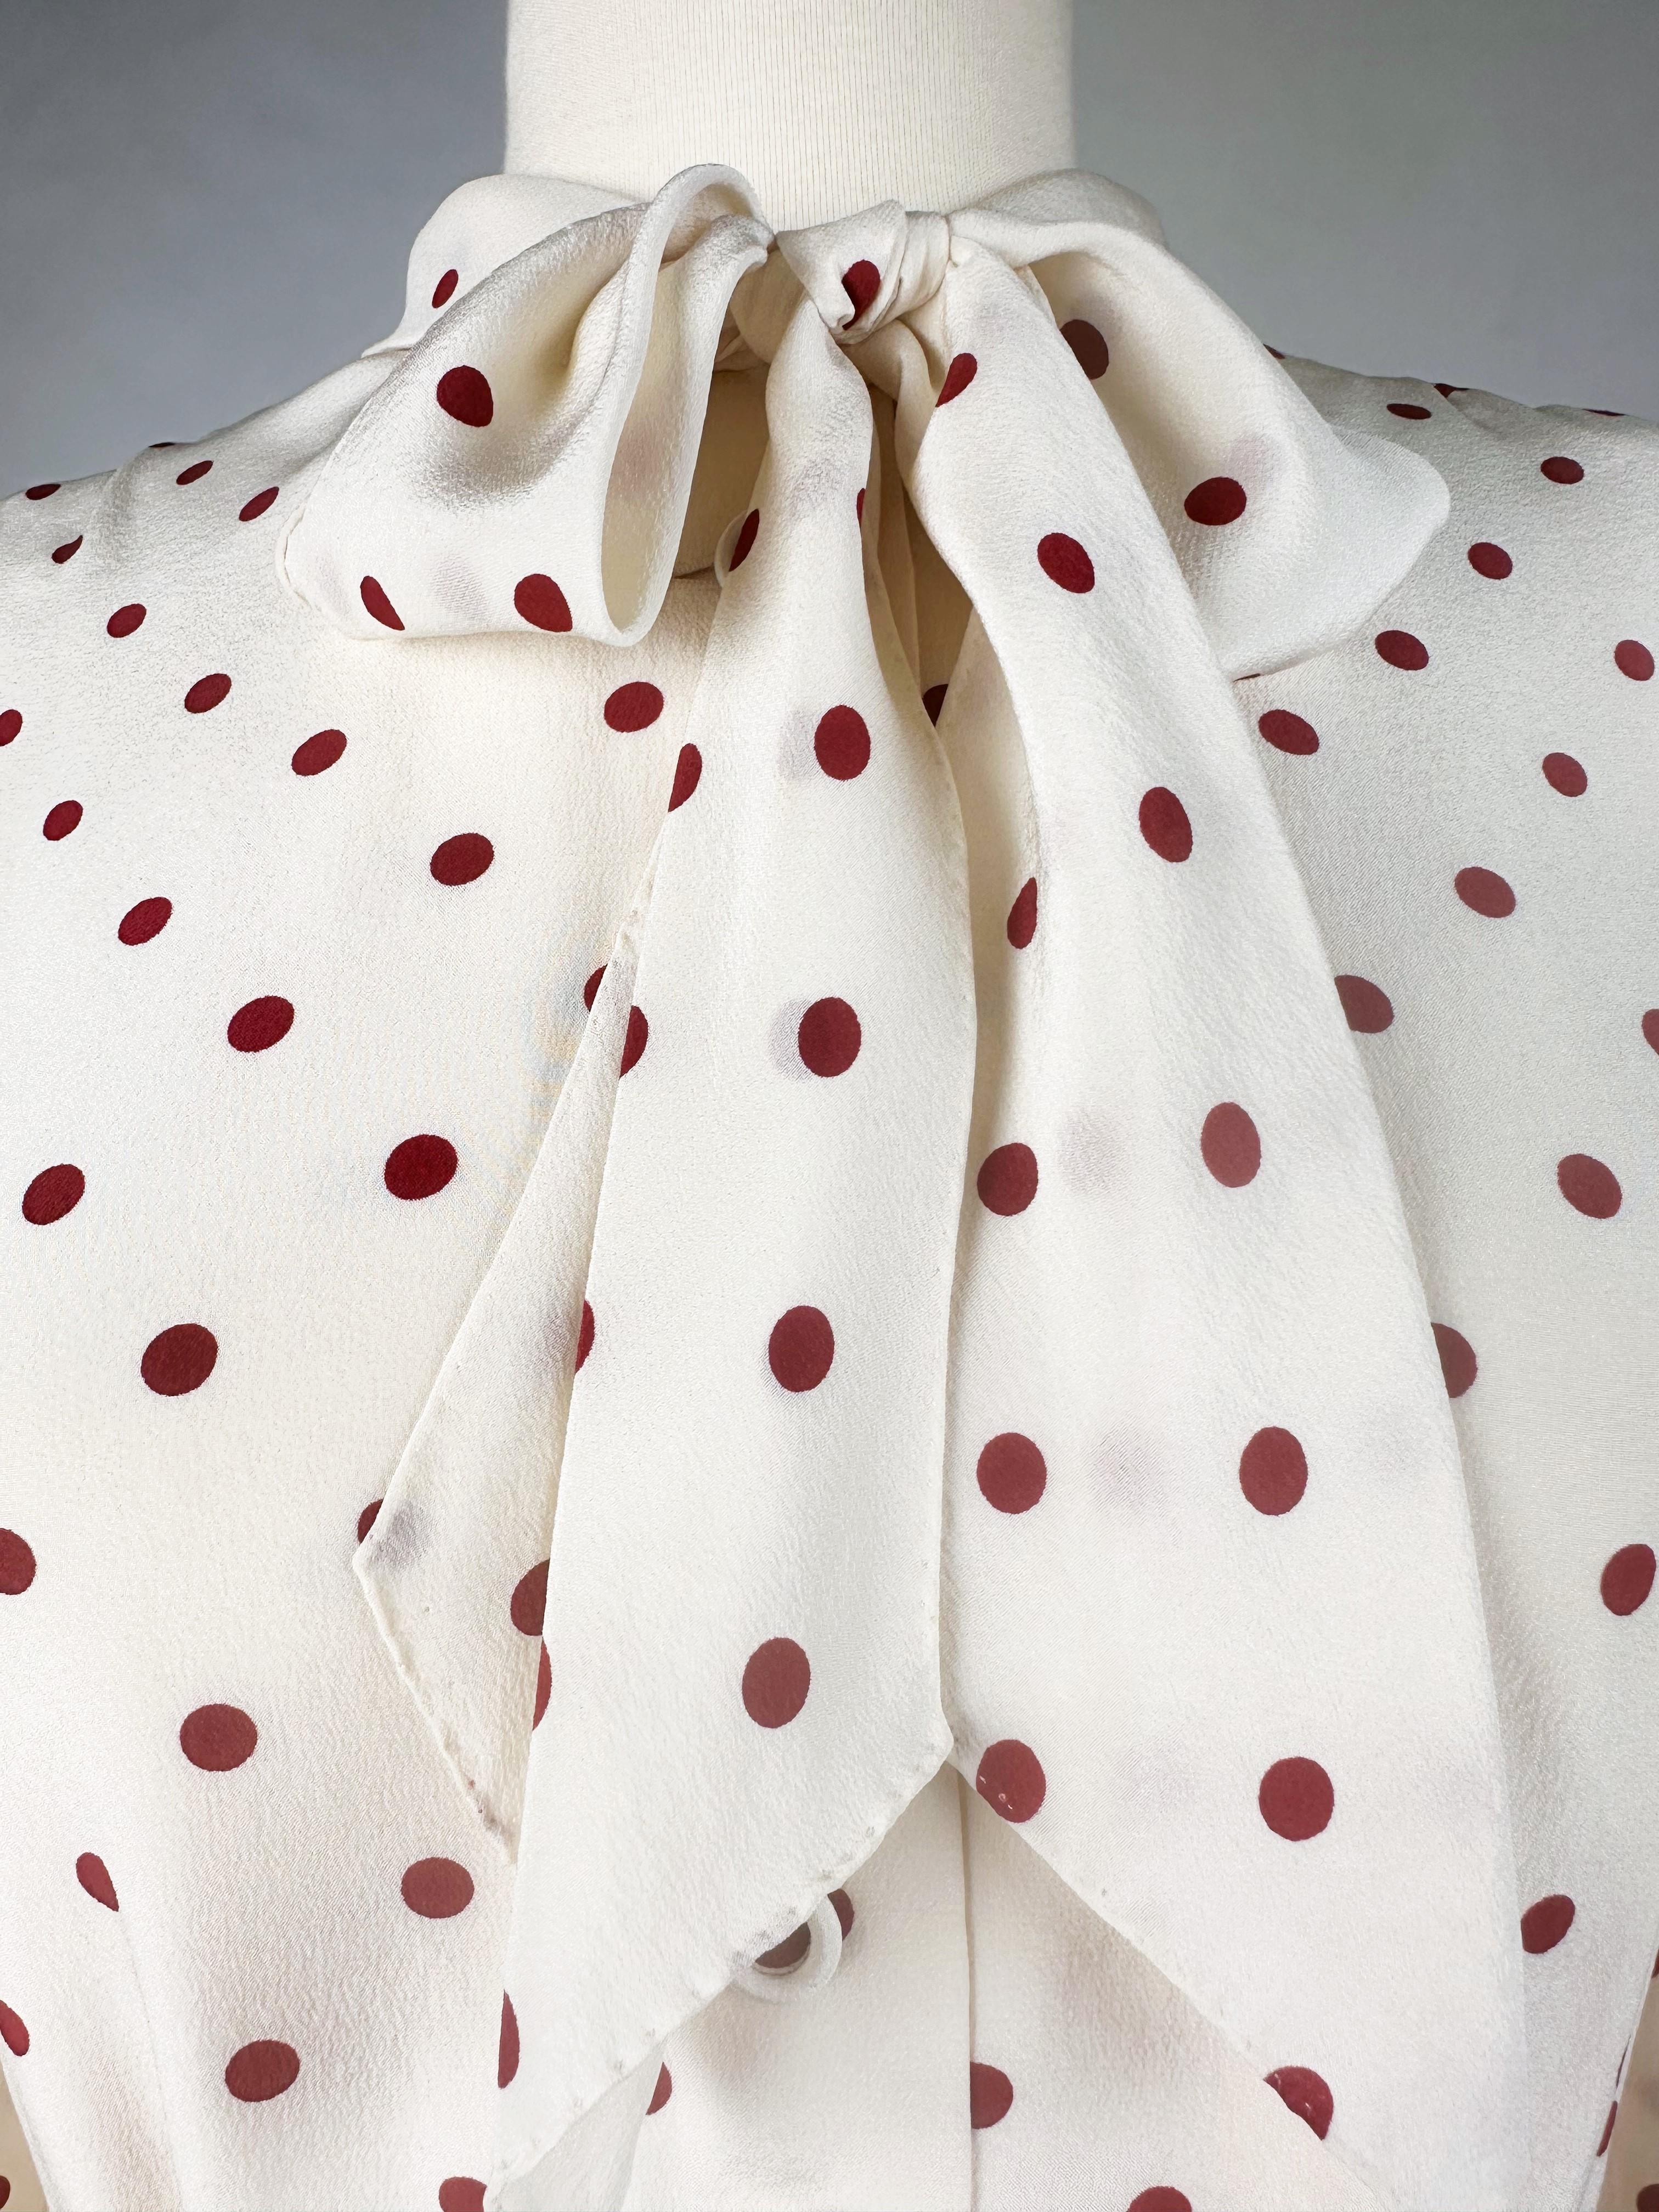 A Polka Dots crepe cocktail dress by Chanel Haute Couture numbered 59644 C. 1975 For Sale 2